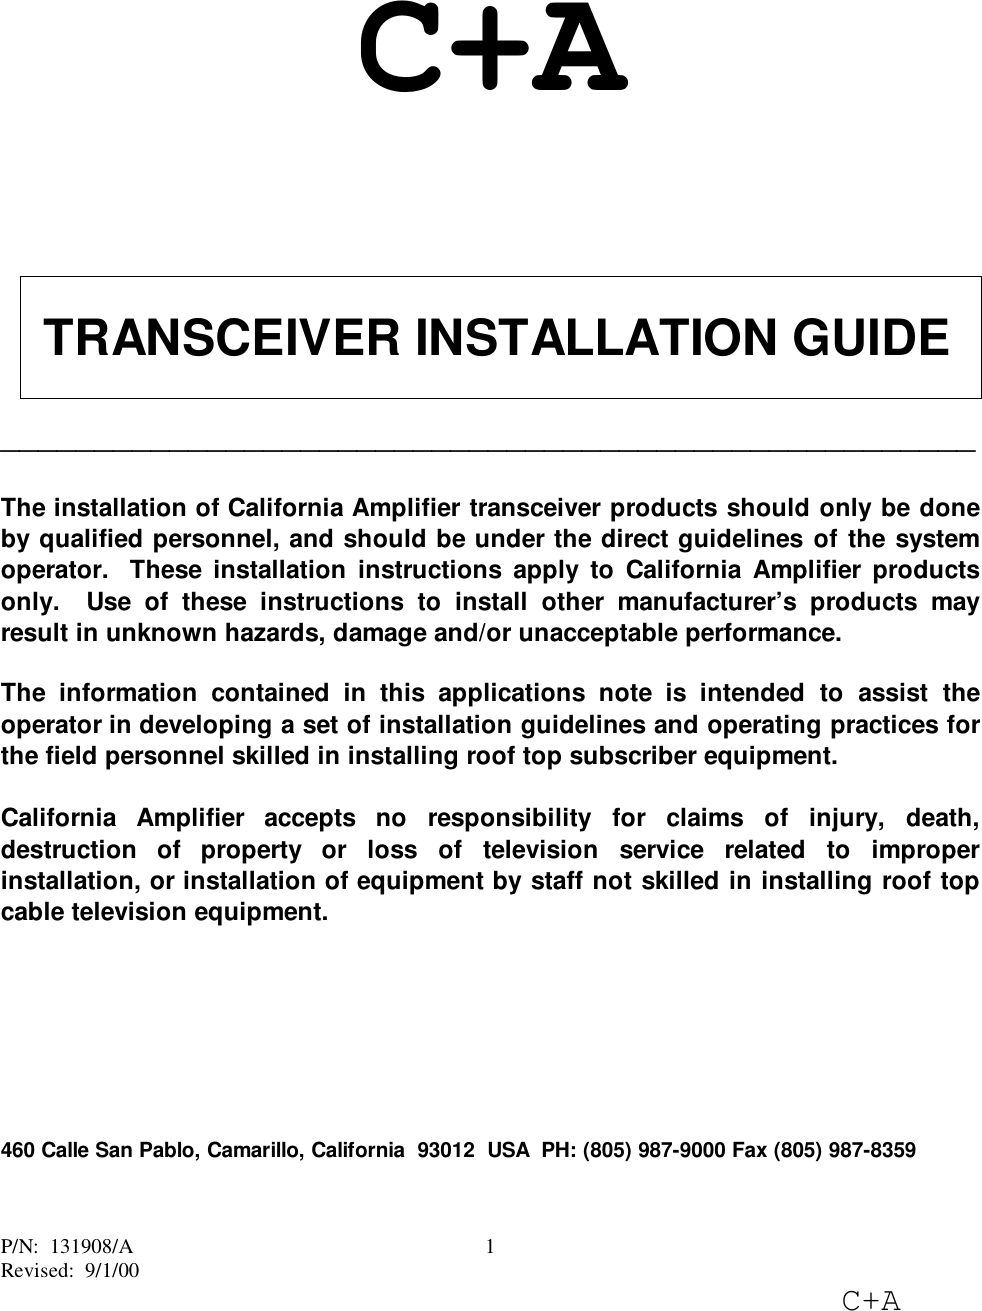 P/N:  131908/ARevised:  9/1/00C+A1C+A TRANSCEIVER INSTALLATION GUIDE____________________________________________________The installation of California Amplifier transceiver products should only be doneby qualified personnel, and should be under the direct guidelines of the systemoperator.  These installation instructions apply to California Amplifier productsonly.  Use of these instructions to install other manufacturer’s products mayresult in unknown hazards, damage and/or unacceptable performance.The information contained in this applications note is intended to assist theoperator in developing a set of installation guidelines and operating practices forthe field personnel skilled in installing roof top subscriber equipment.California Amplifier accepts no responsibility for claims of injury, death,destruction of property or loss of television service related to improperinstallation, or installation of equipment by staff not skilled in installing roof topcable television equipment.460 Calle San Pablo, Camarillo, California  93012  USA  PH: (805) 987-9000 Fax (805) 987-8359